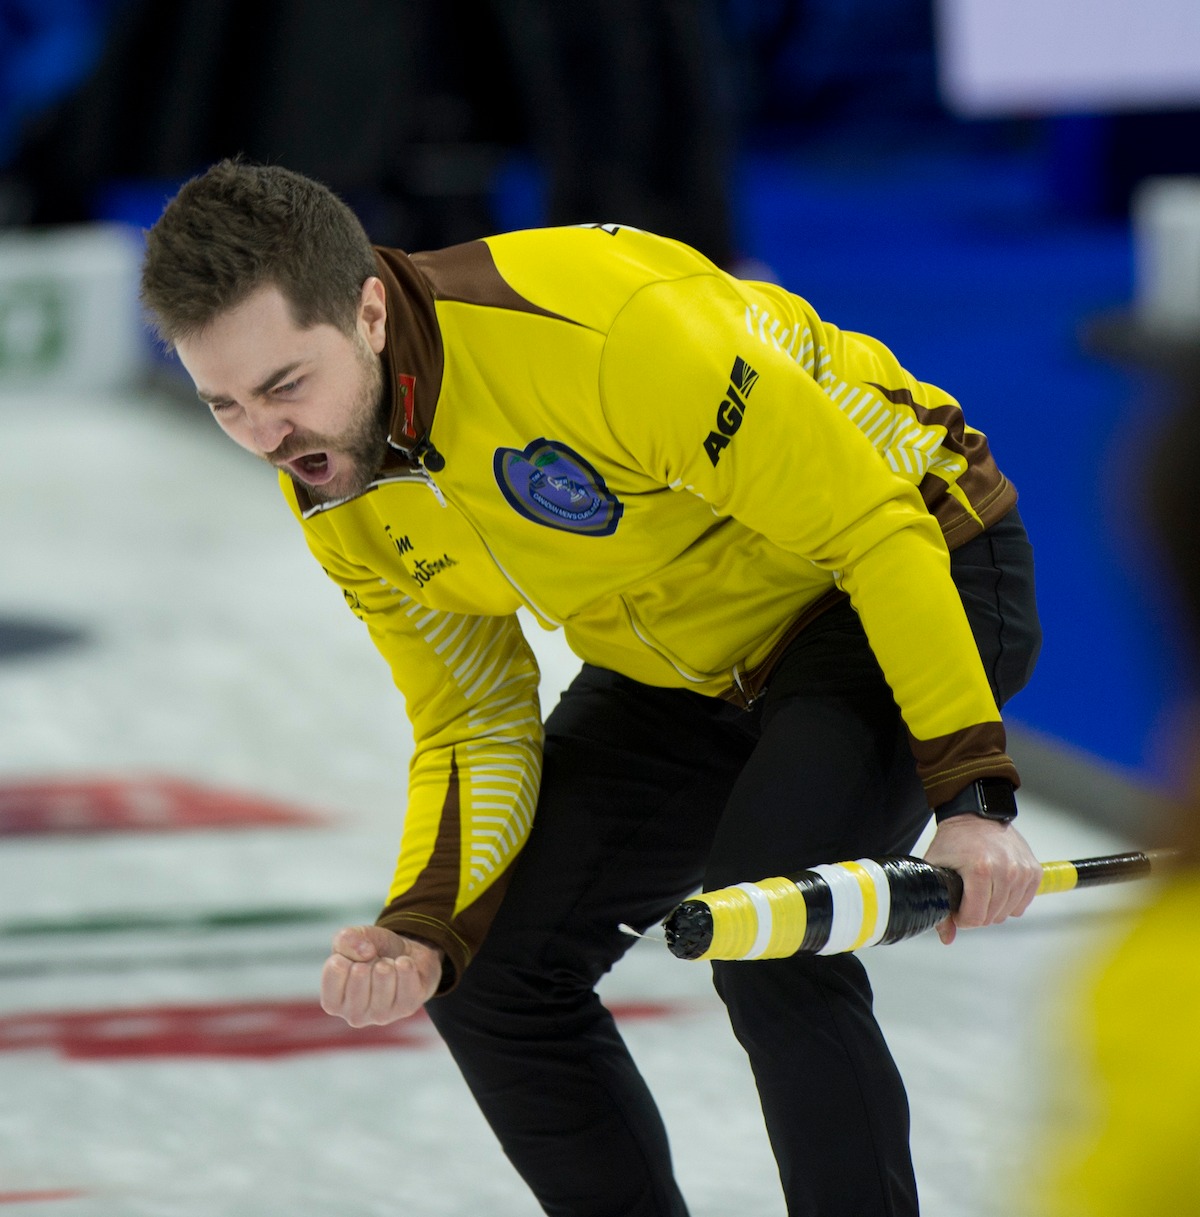 CurlingZone Dunstone punches ticket to Brier final